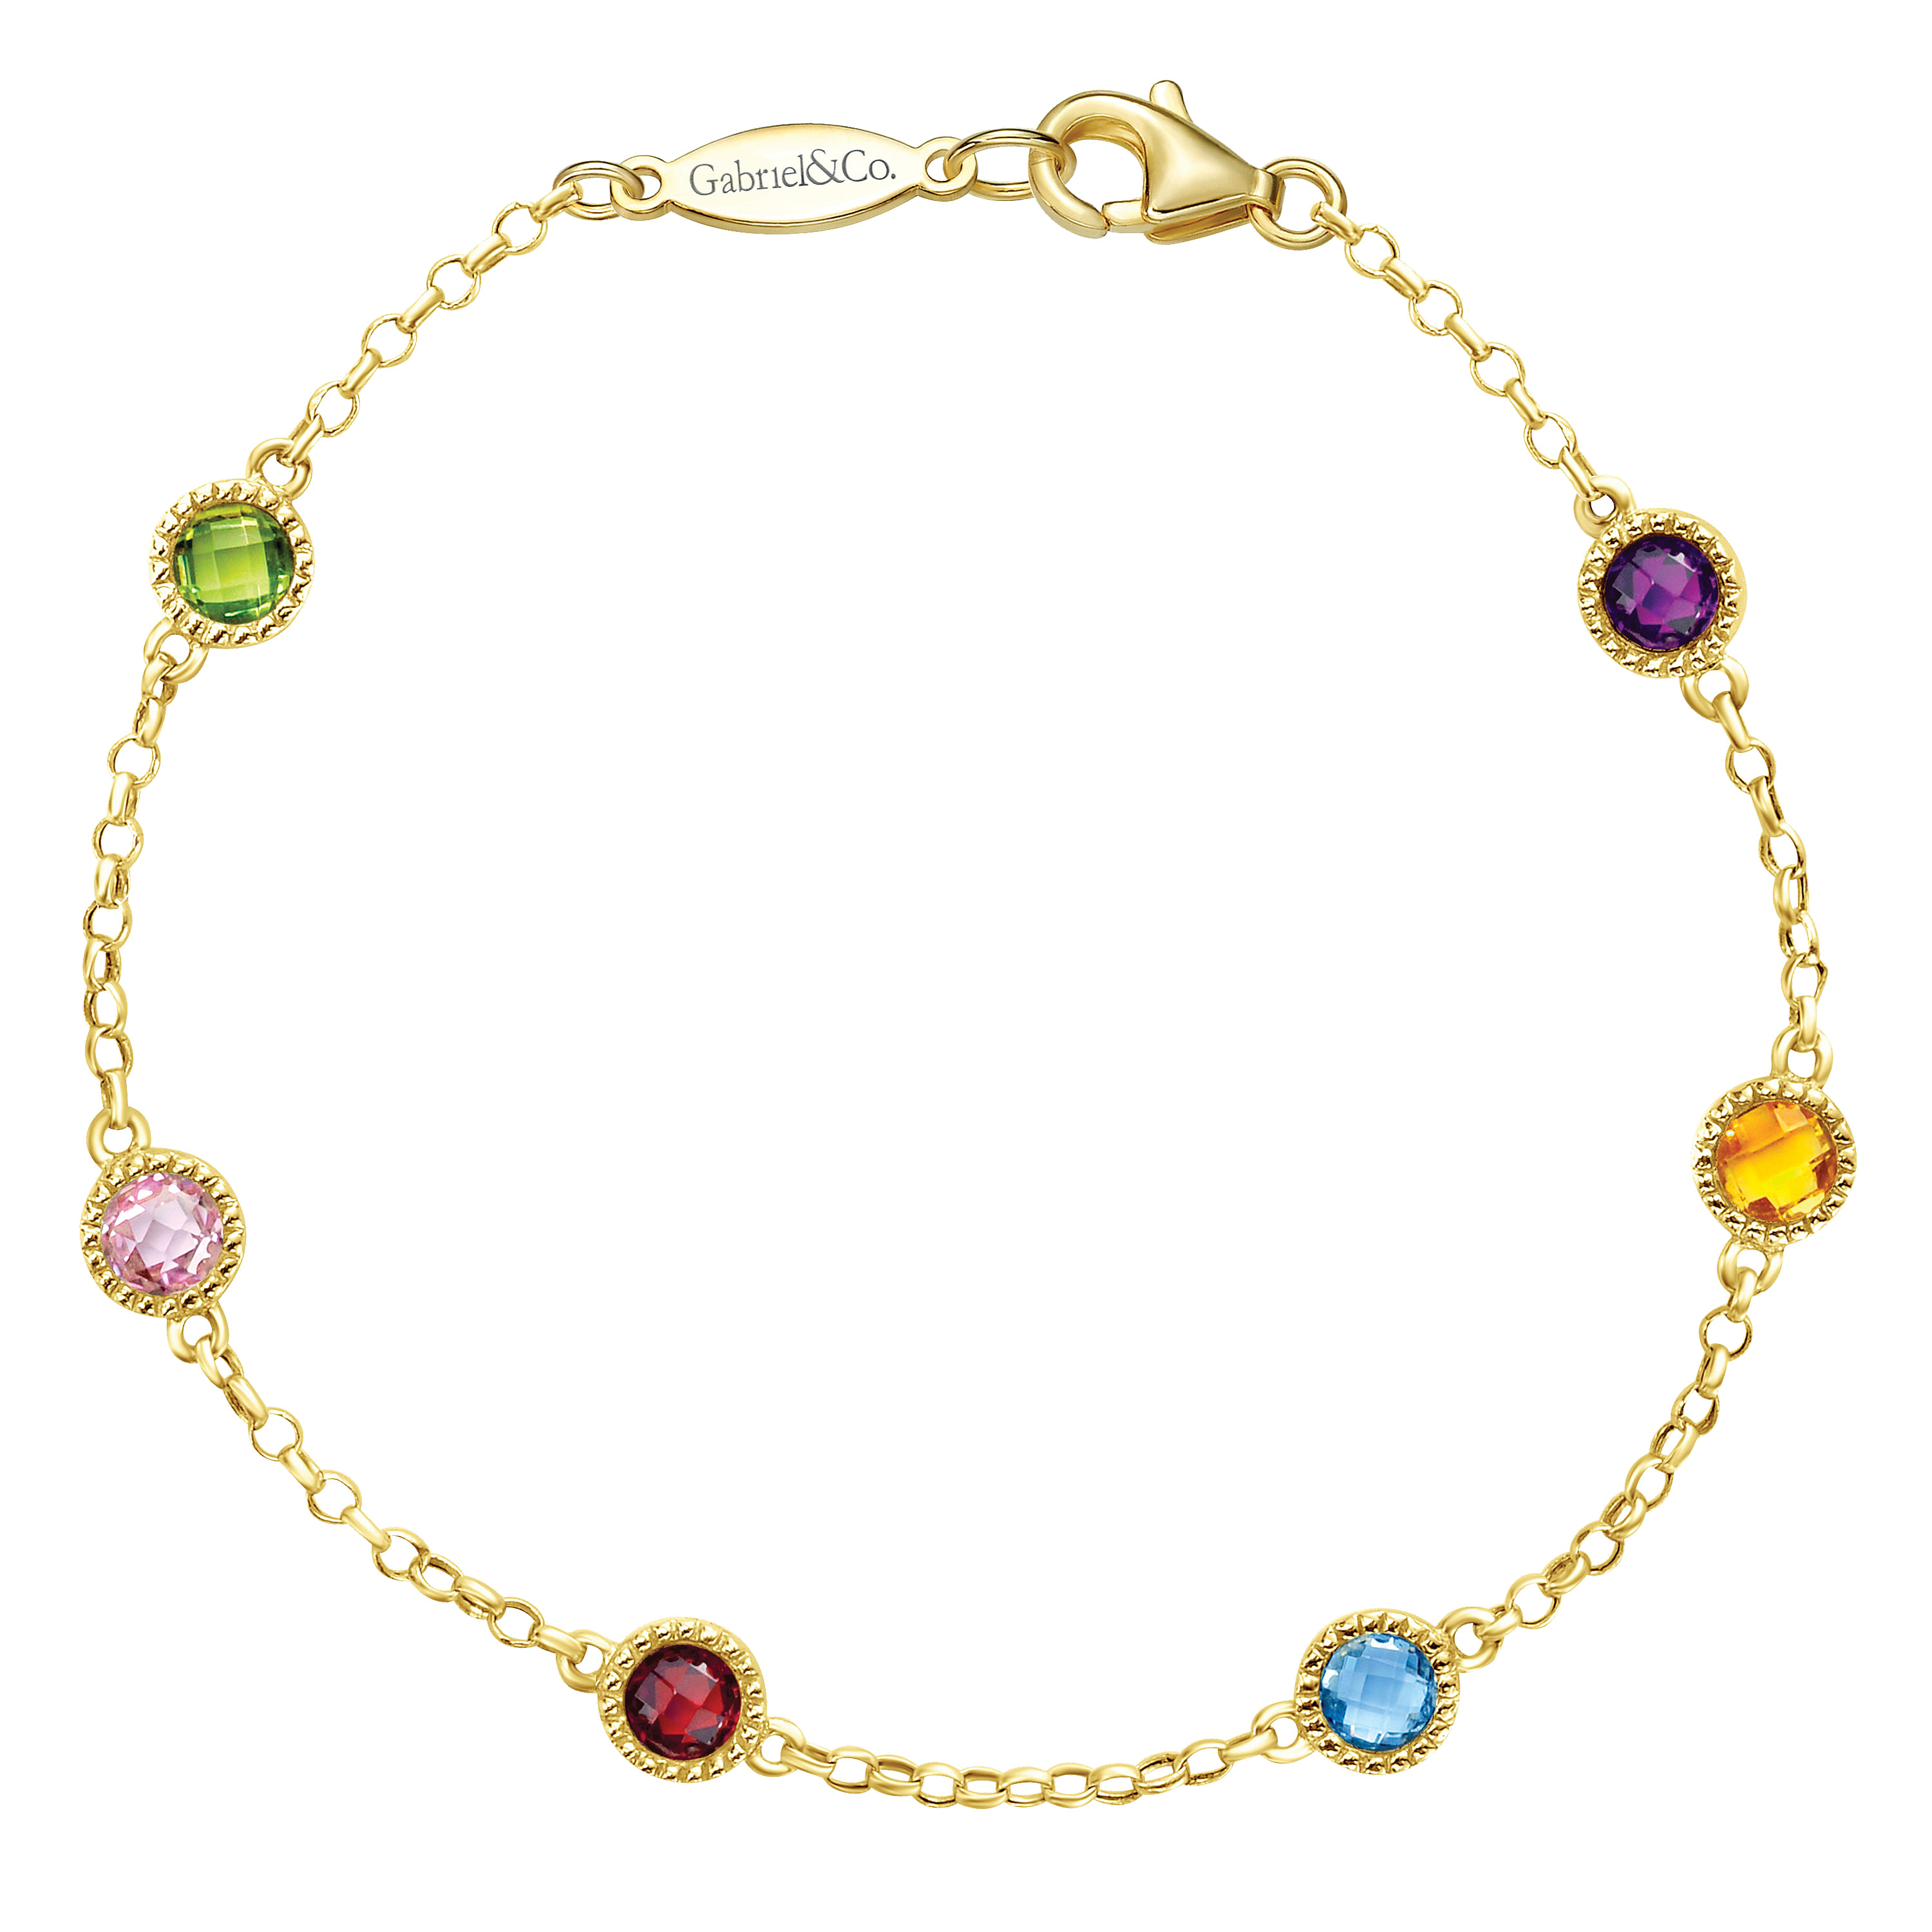 https://images.gabrielny.com/is/image/GabrielCo/Gabriel-14K-Yellow-Gold-Chain-Bracelet-with-Multi-Color-Stone-Stations~TB2470Y4JMC-1.jpg